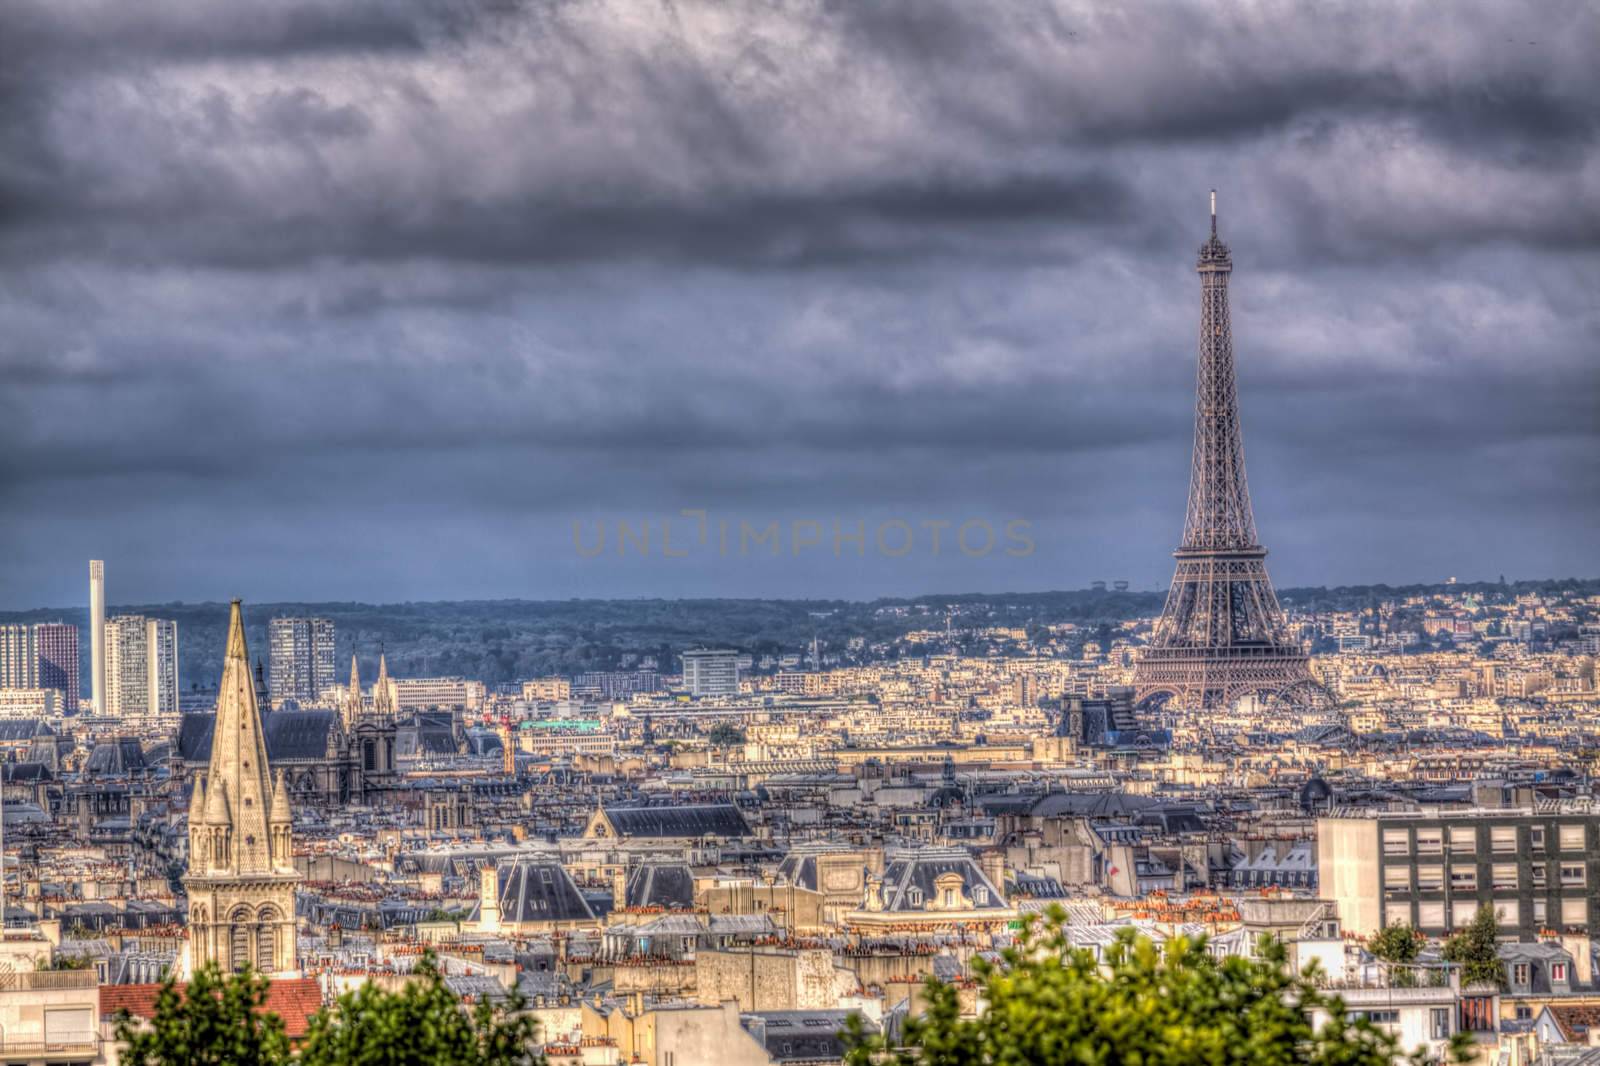 Dramatic stormy clouds forming over Paris with Eiffel Tower